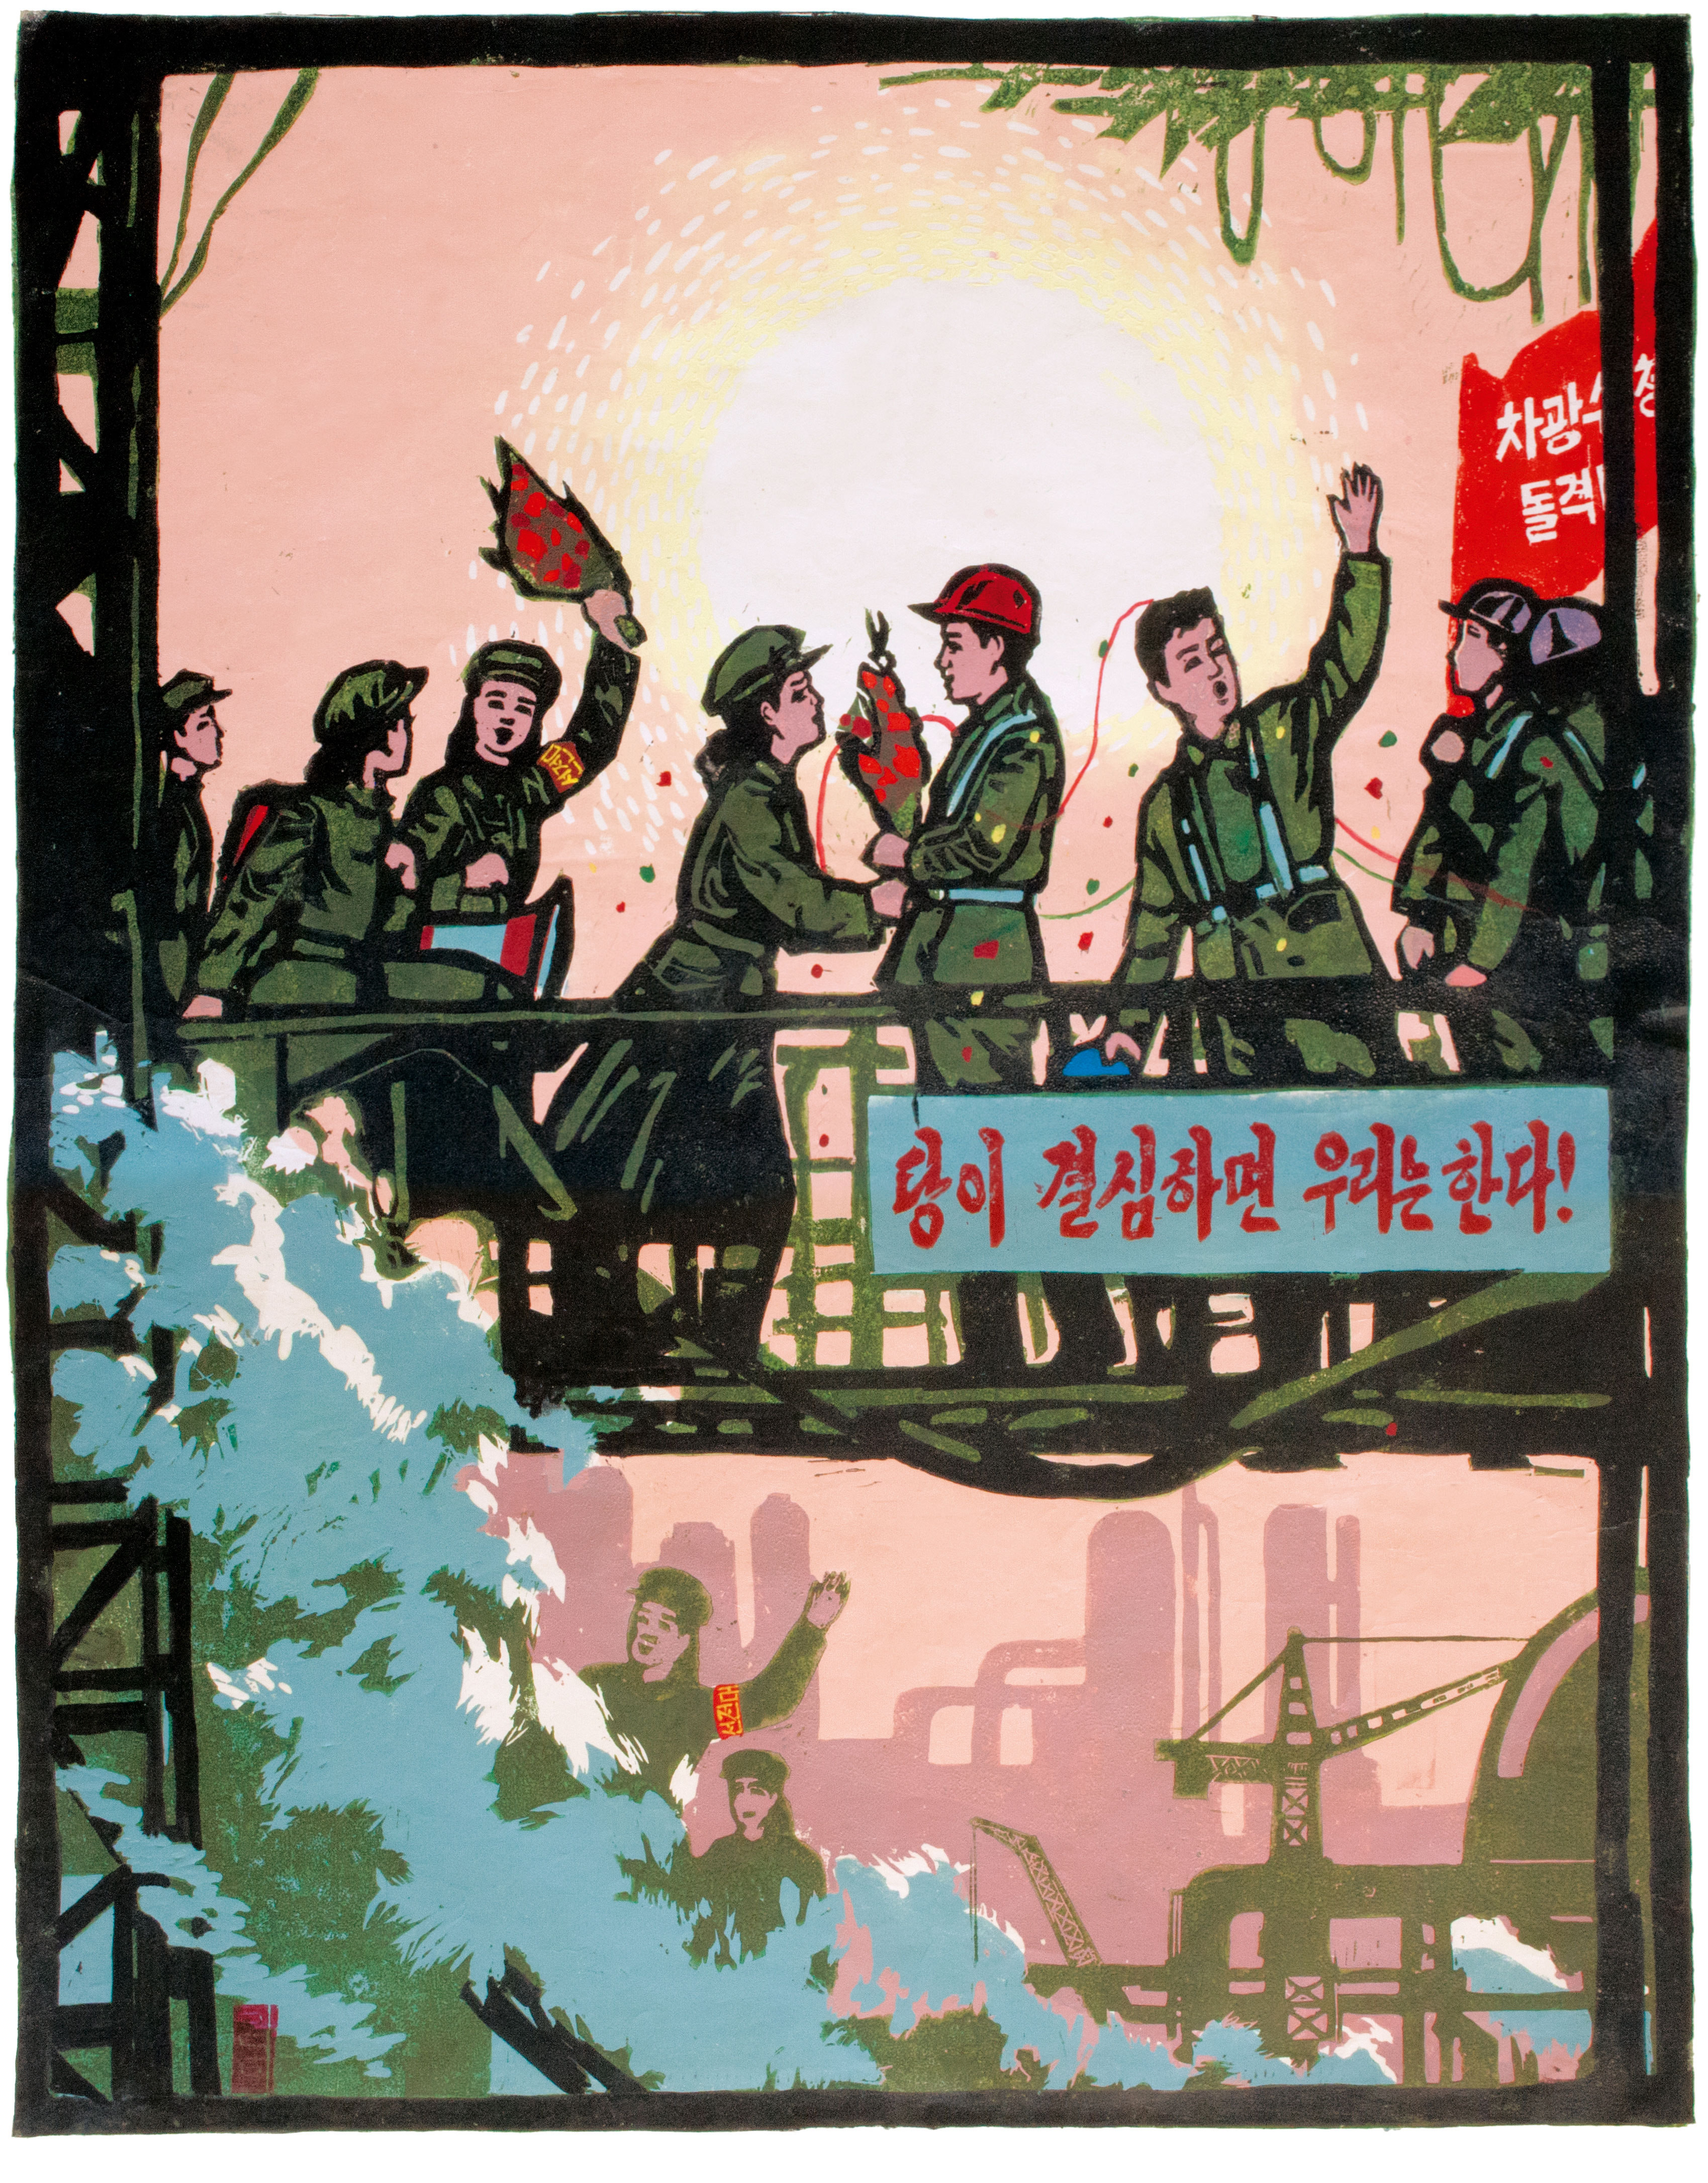 Artistic Propaganda Group by Kim Kwang Nam, 1999. All images from Printed in North Korea